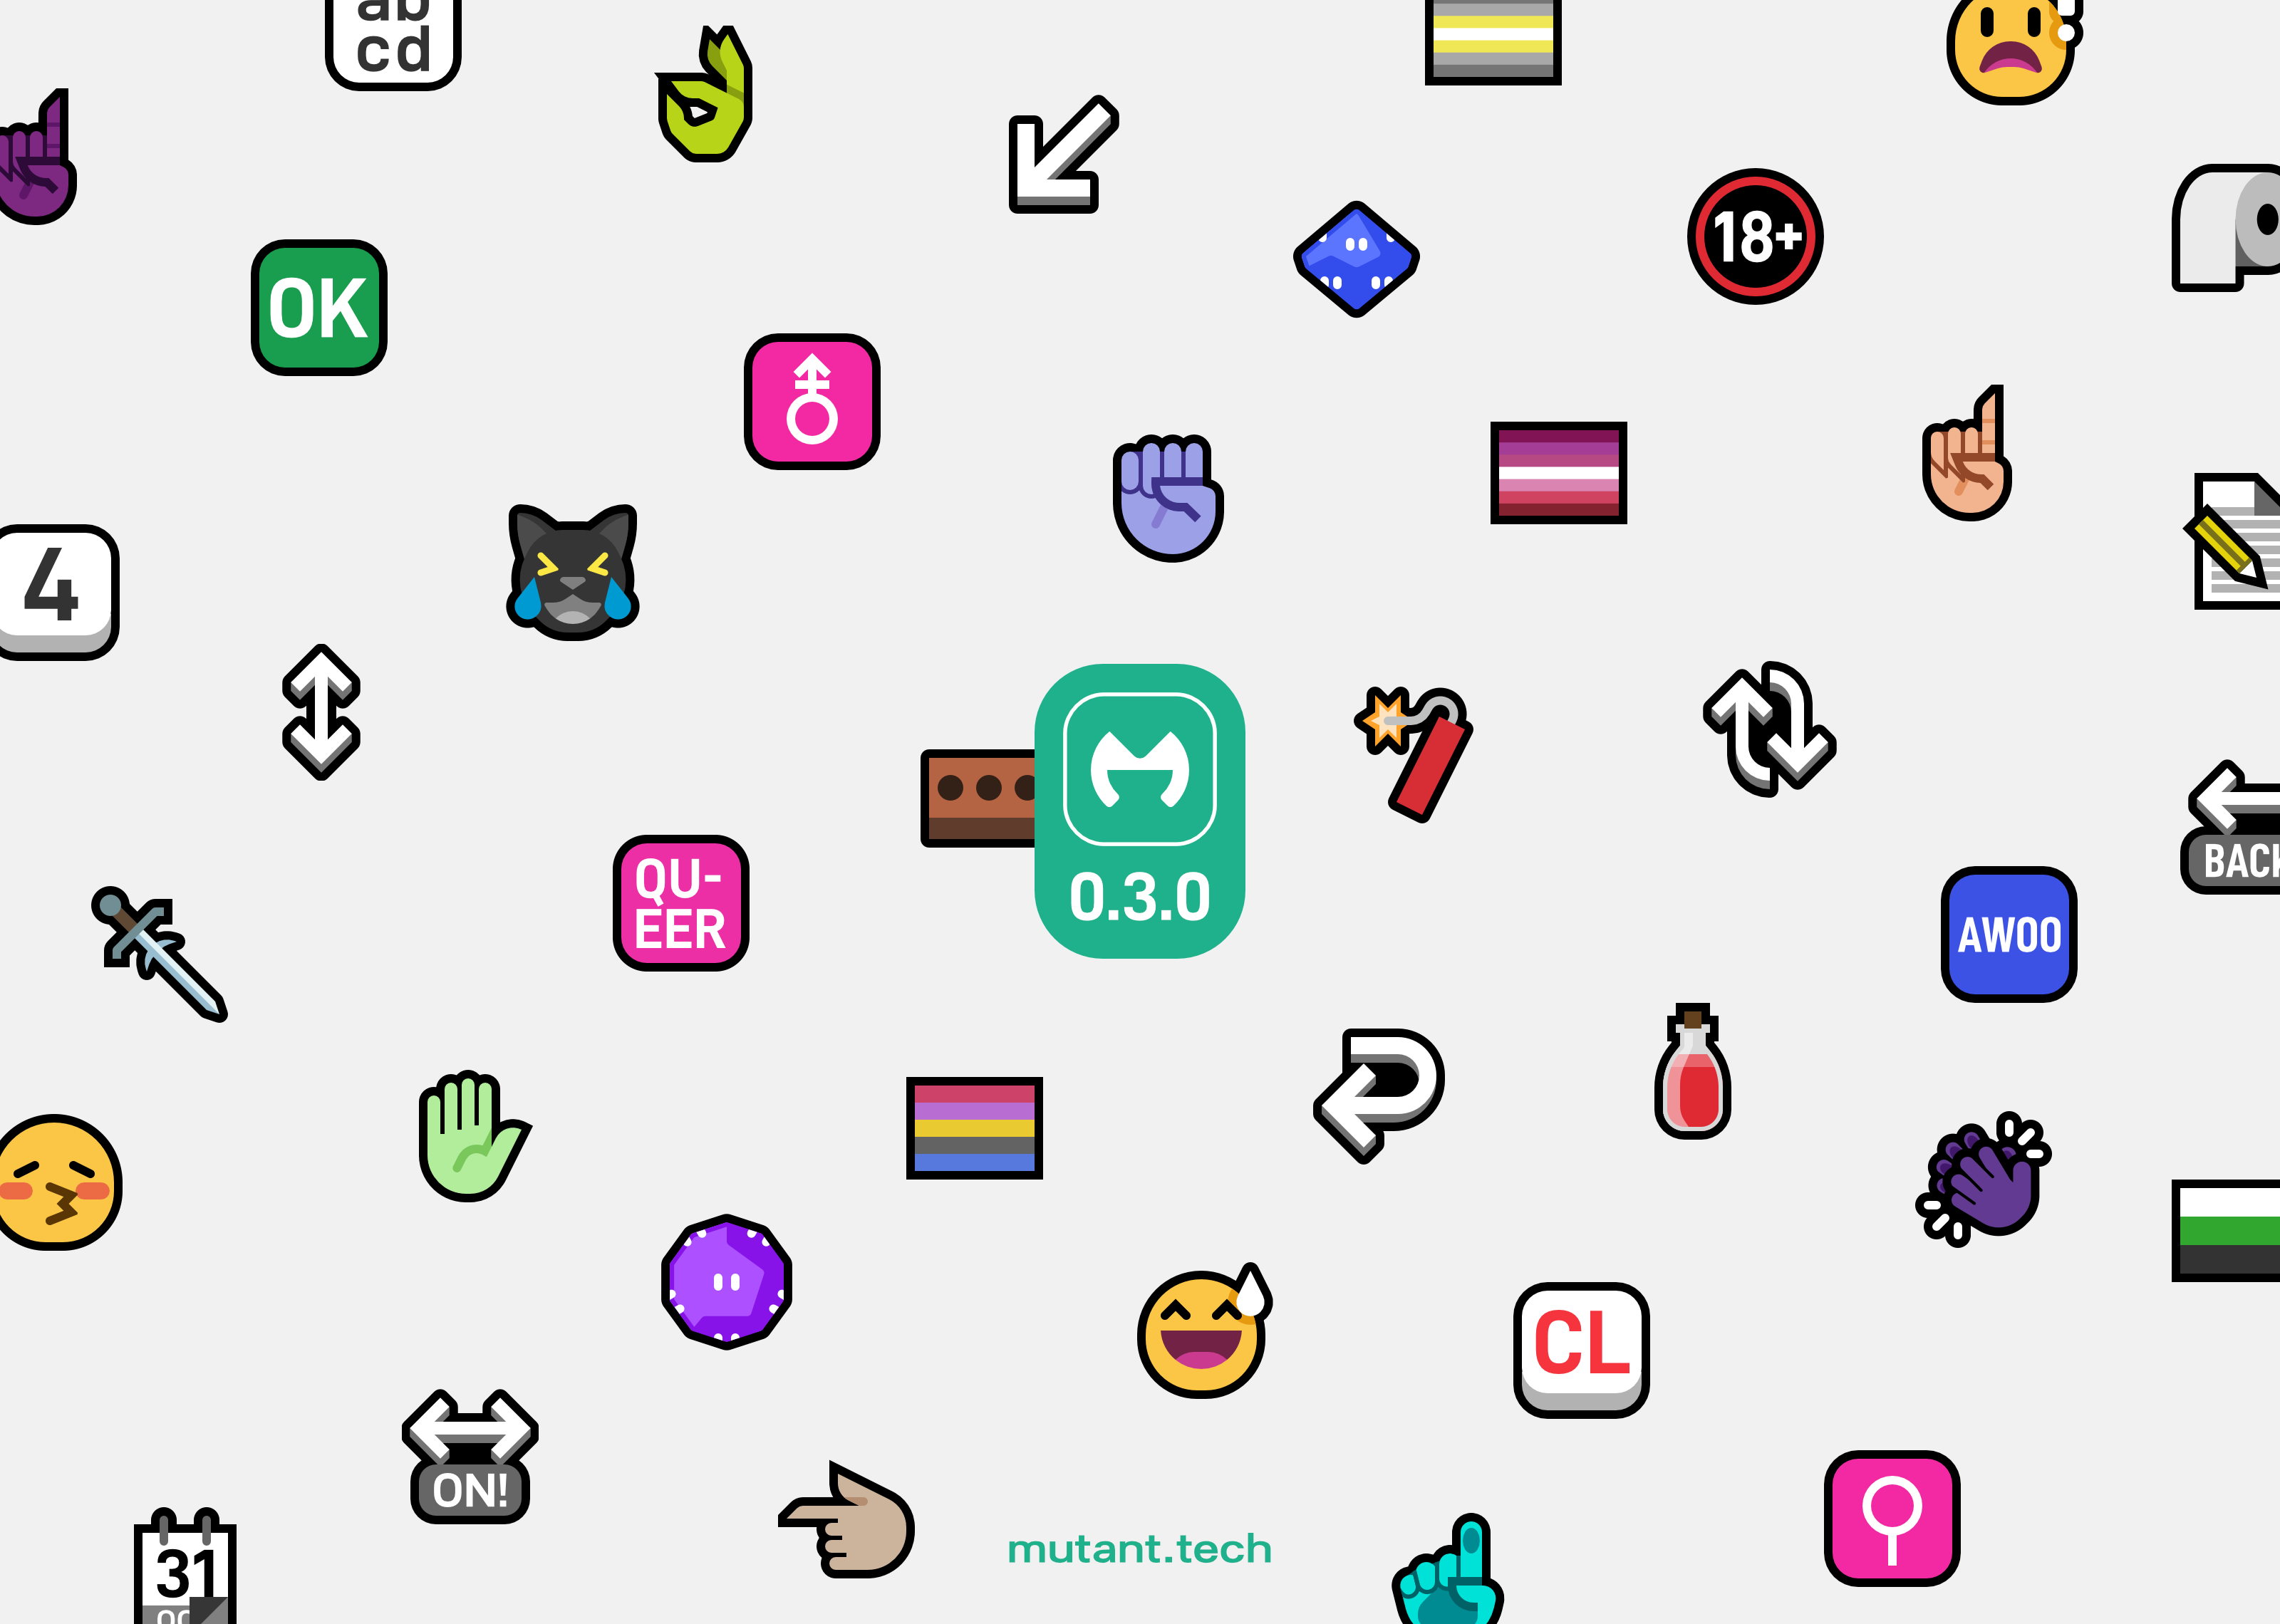 An array of new or improved emoji in Mutant Standard 0.3.0 in a scattered pattern, in the middle is a little teal badge with the Mutant Standard logo and '0.3.0' below it. At the bottom is 'mutant.tech', also in teal.